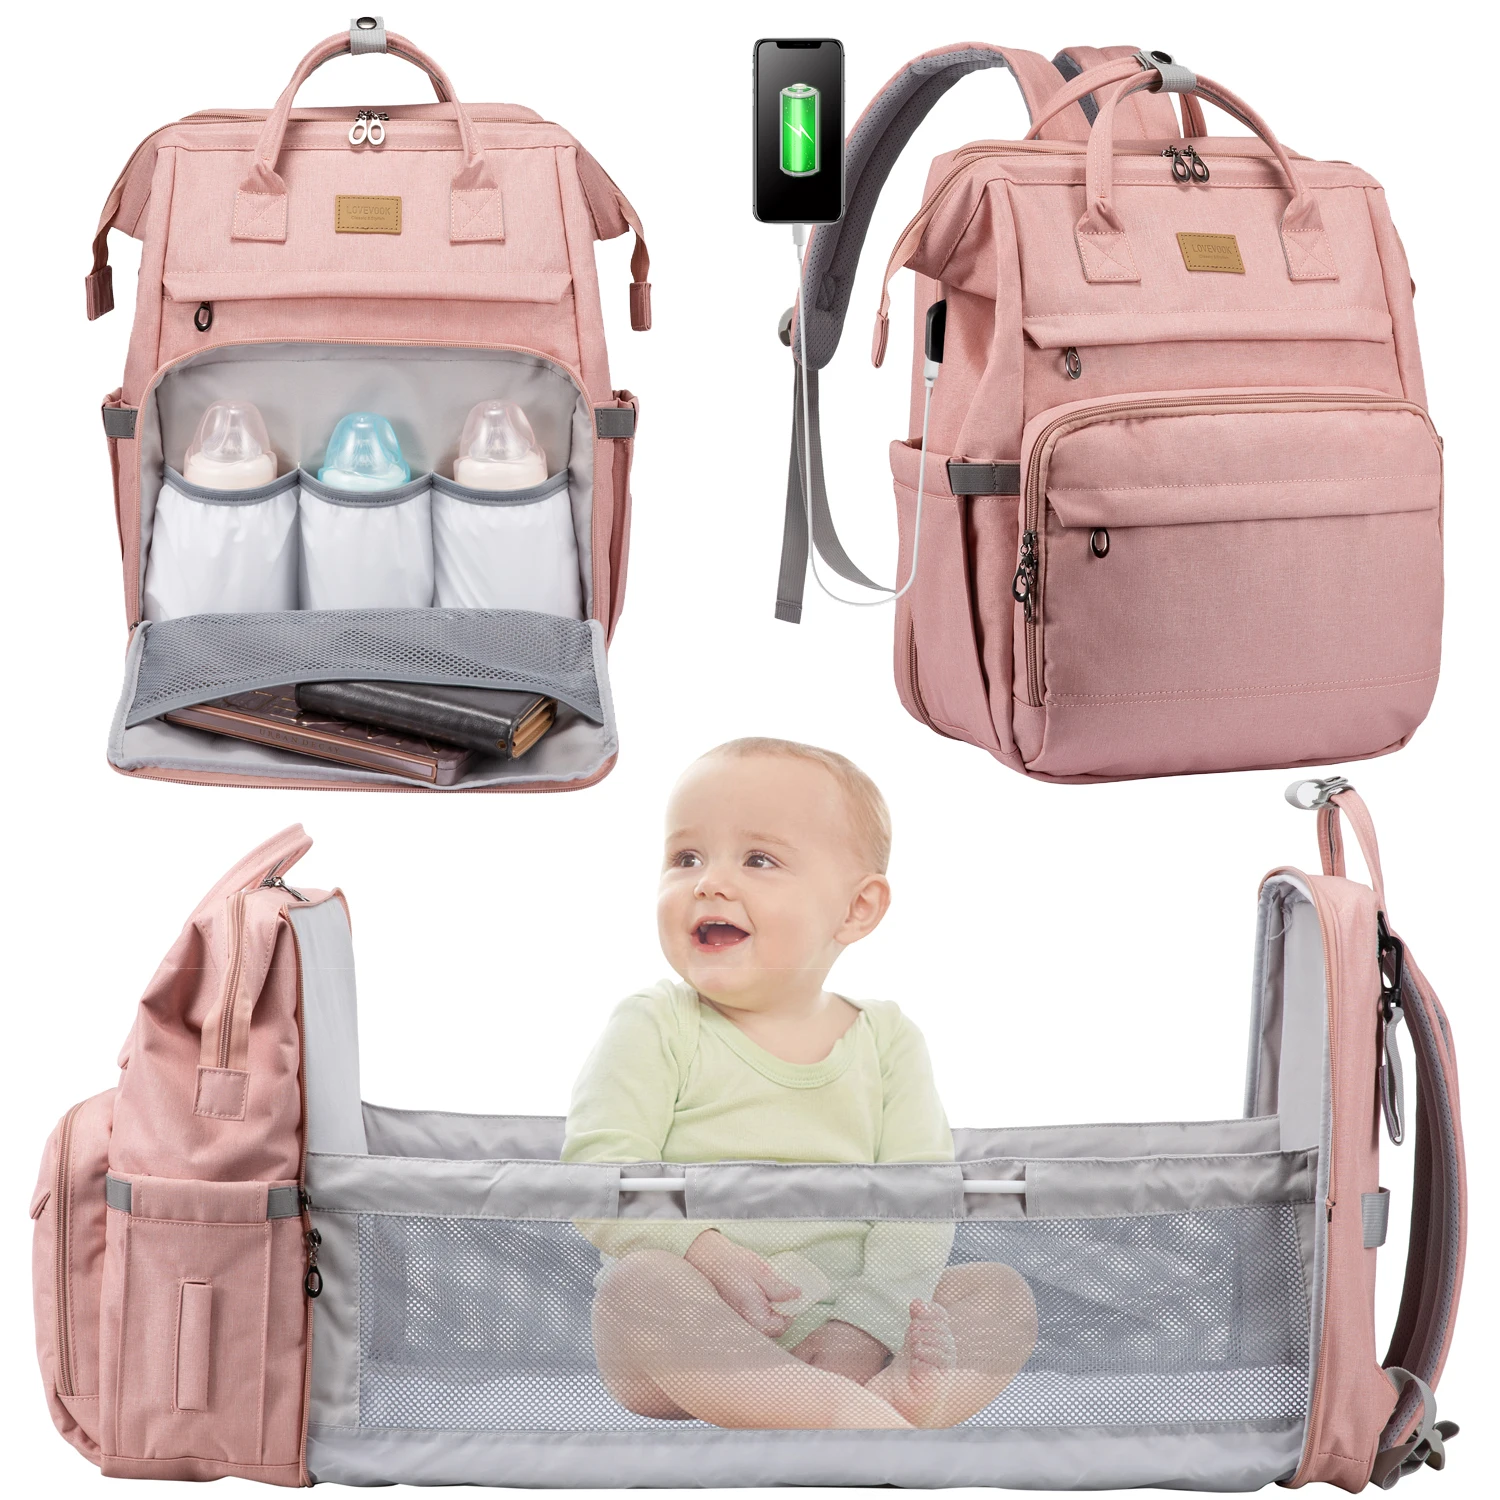 Lovevook High Quality Diaper Bag Portable Nappy Mommy Bagpack Travel ...